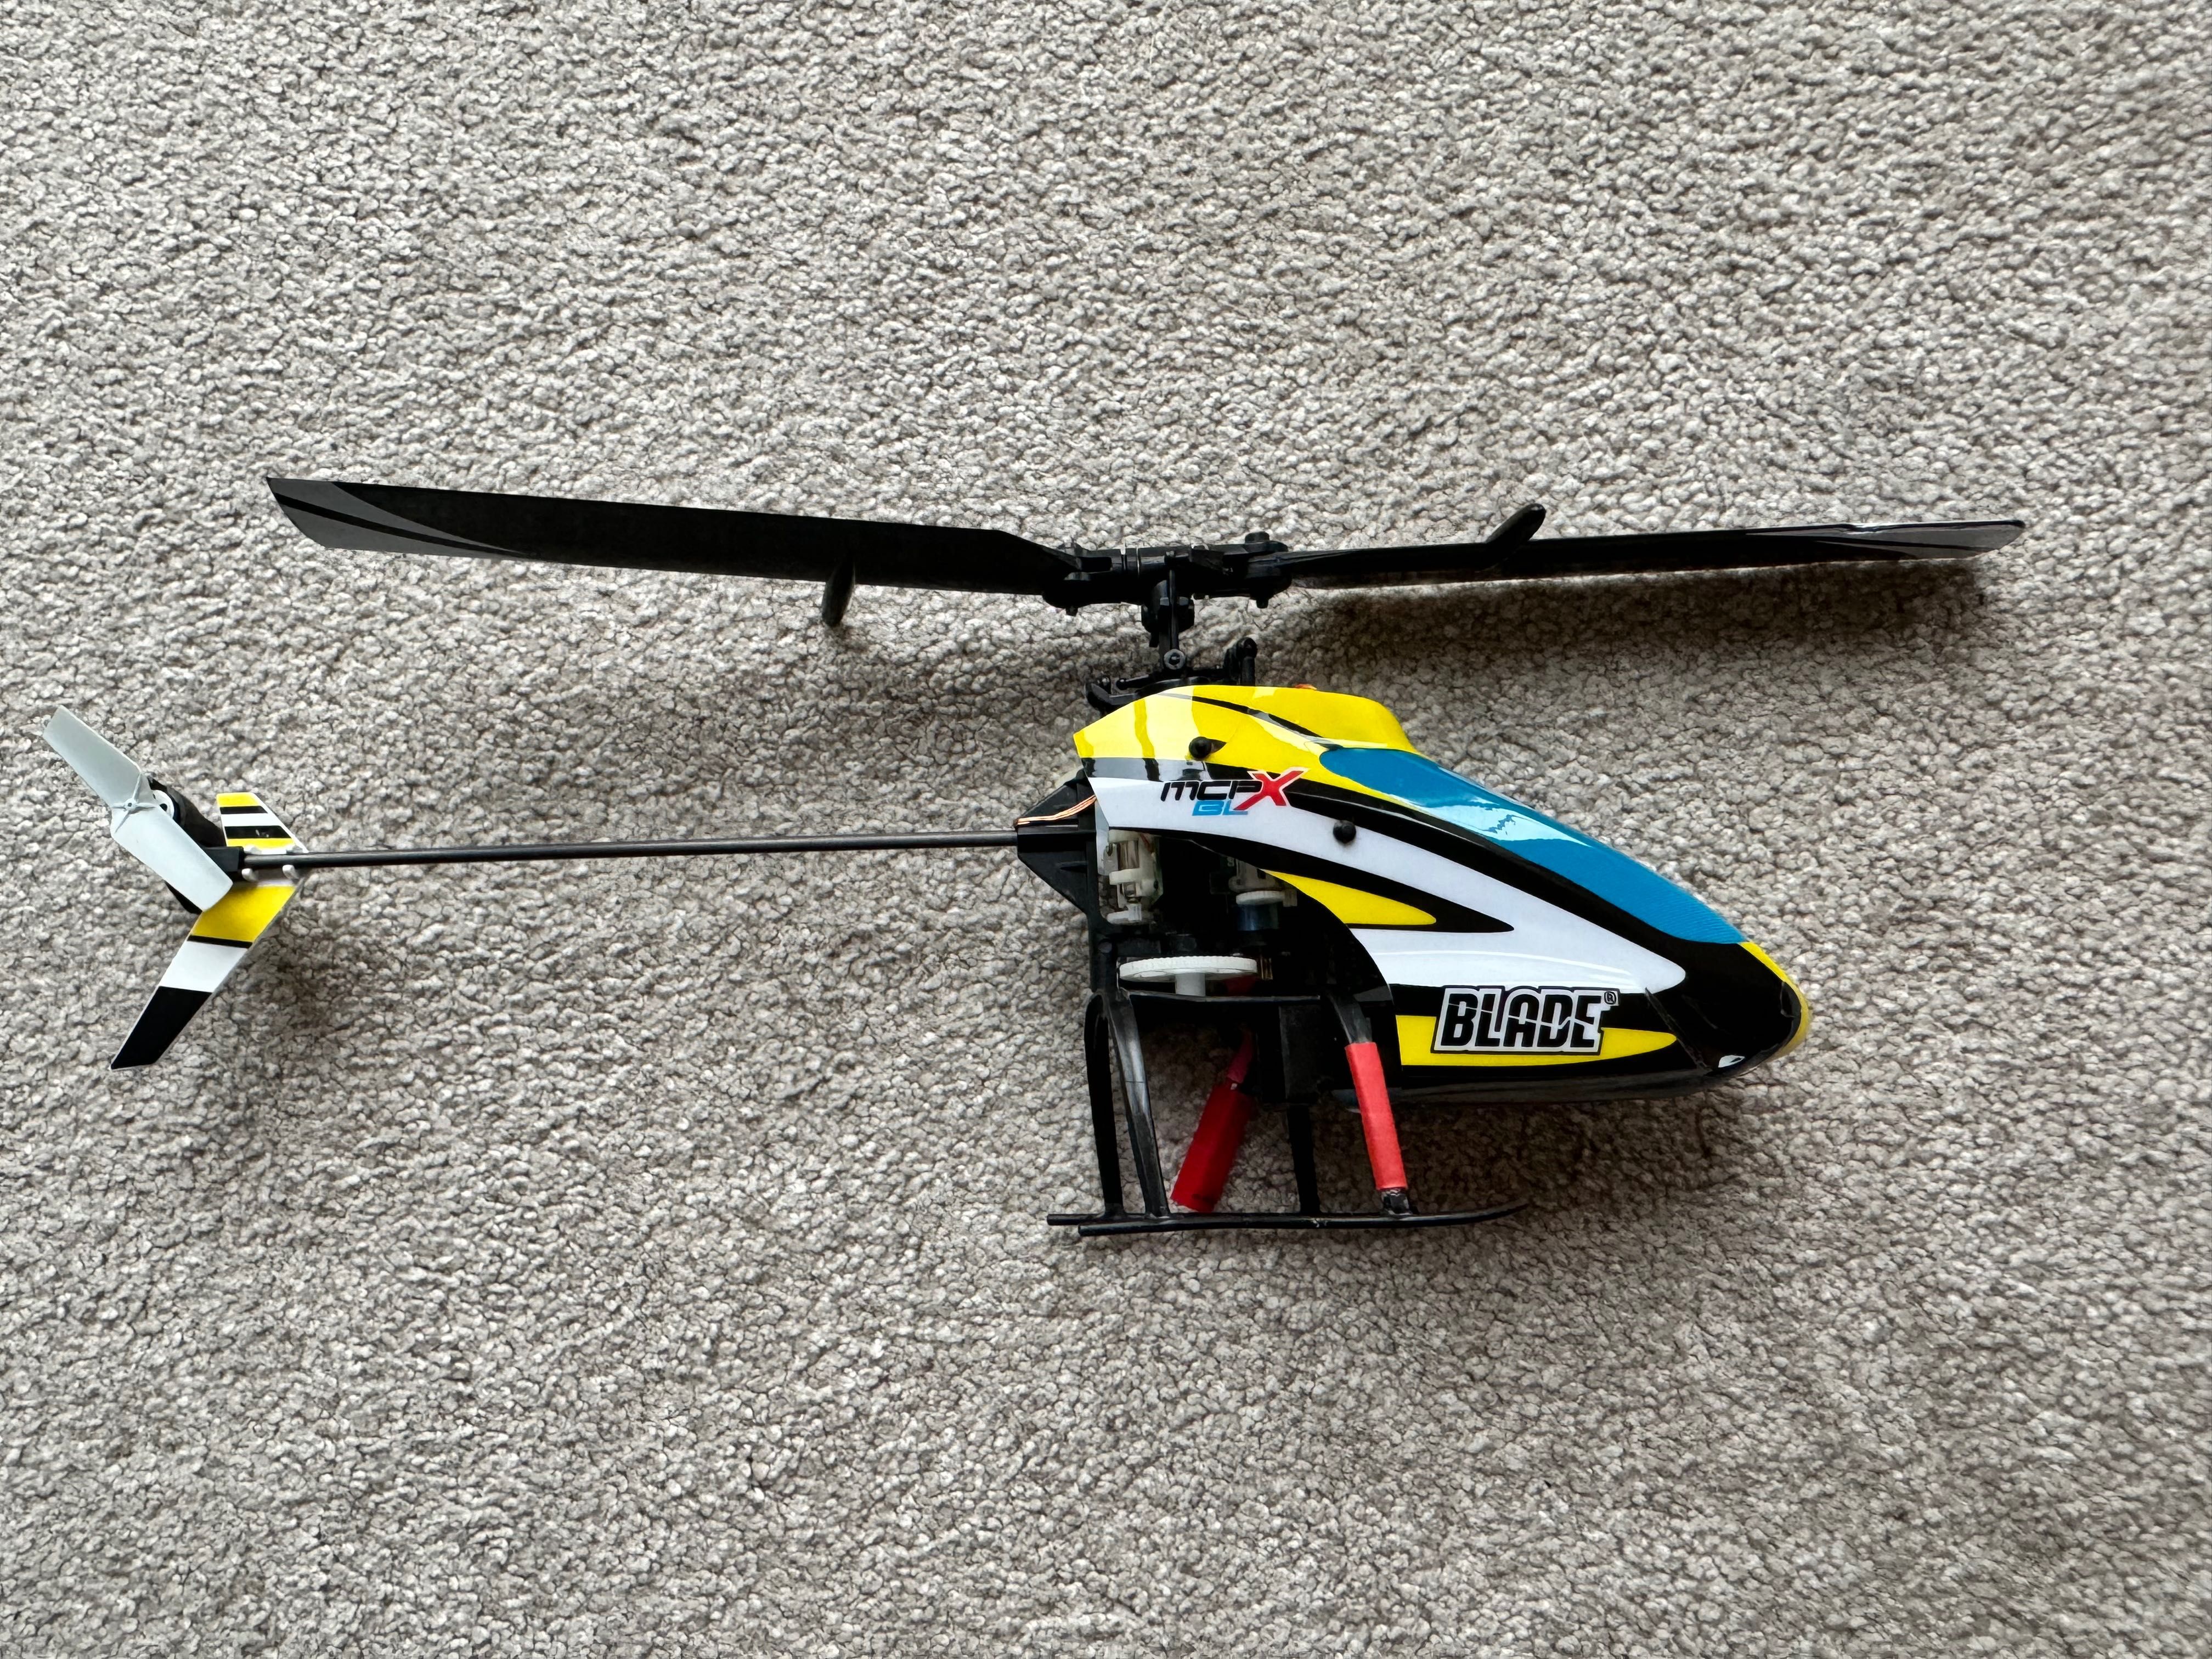 Helikopter RC Blade mCPX BL nowy Mega zestaw